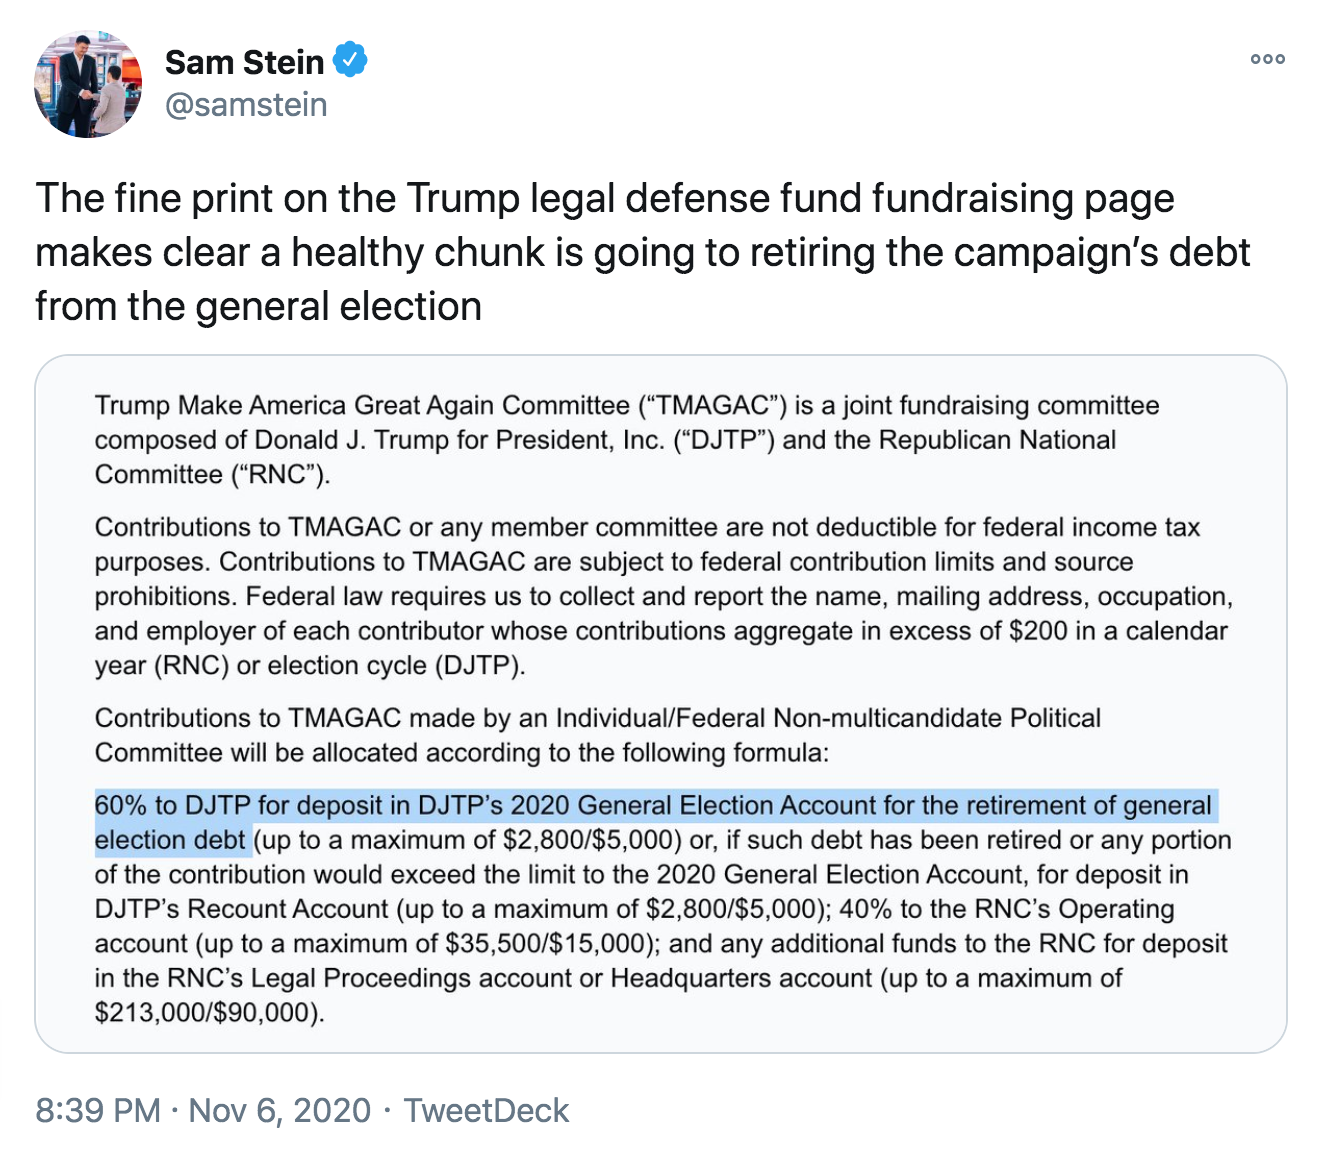 document - 000 Sam Stein The fine print on the Trump legal defense fund fundraising page makes clear a healthy chunk is going to retiring the campaign's debt from the general election Trump Make America Great Again Committee "Tmagac" is a joint fundraisin